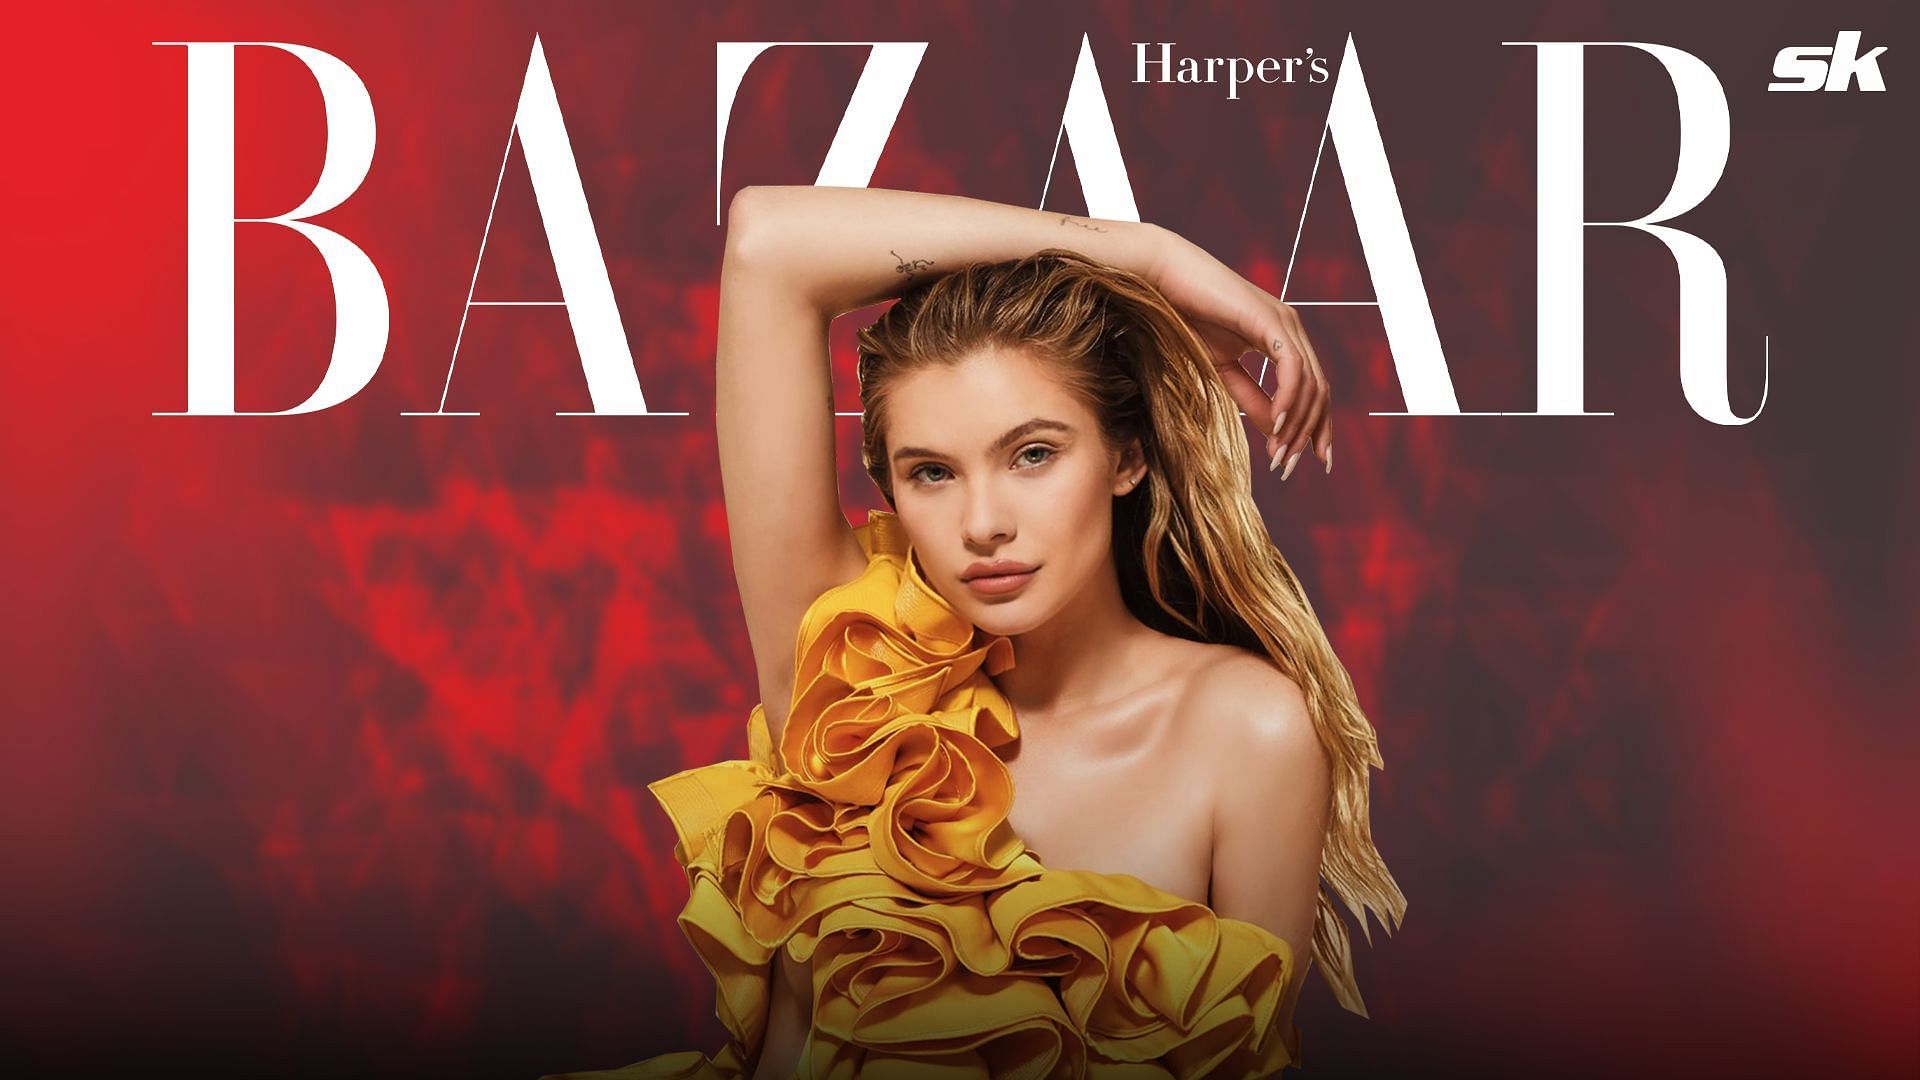 In Photos: Josie Canseco dazzles as the cover girl for Harper